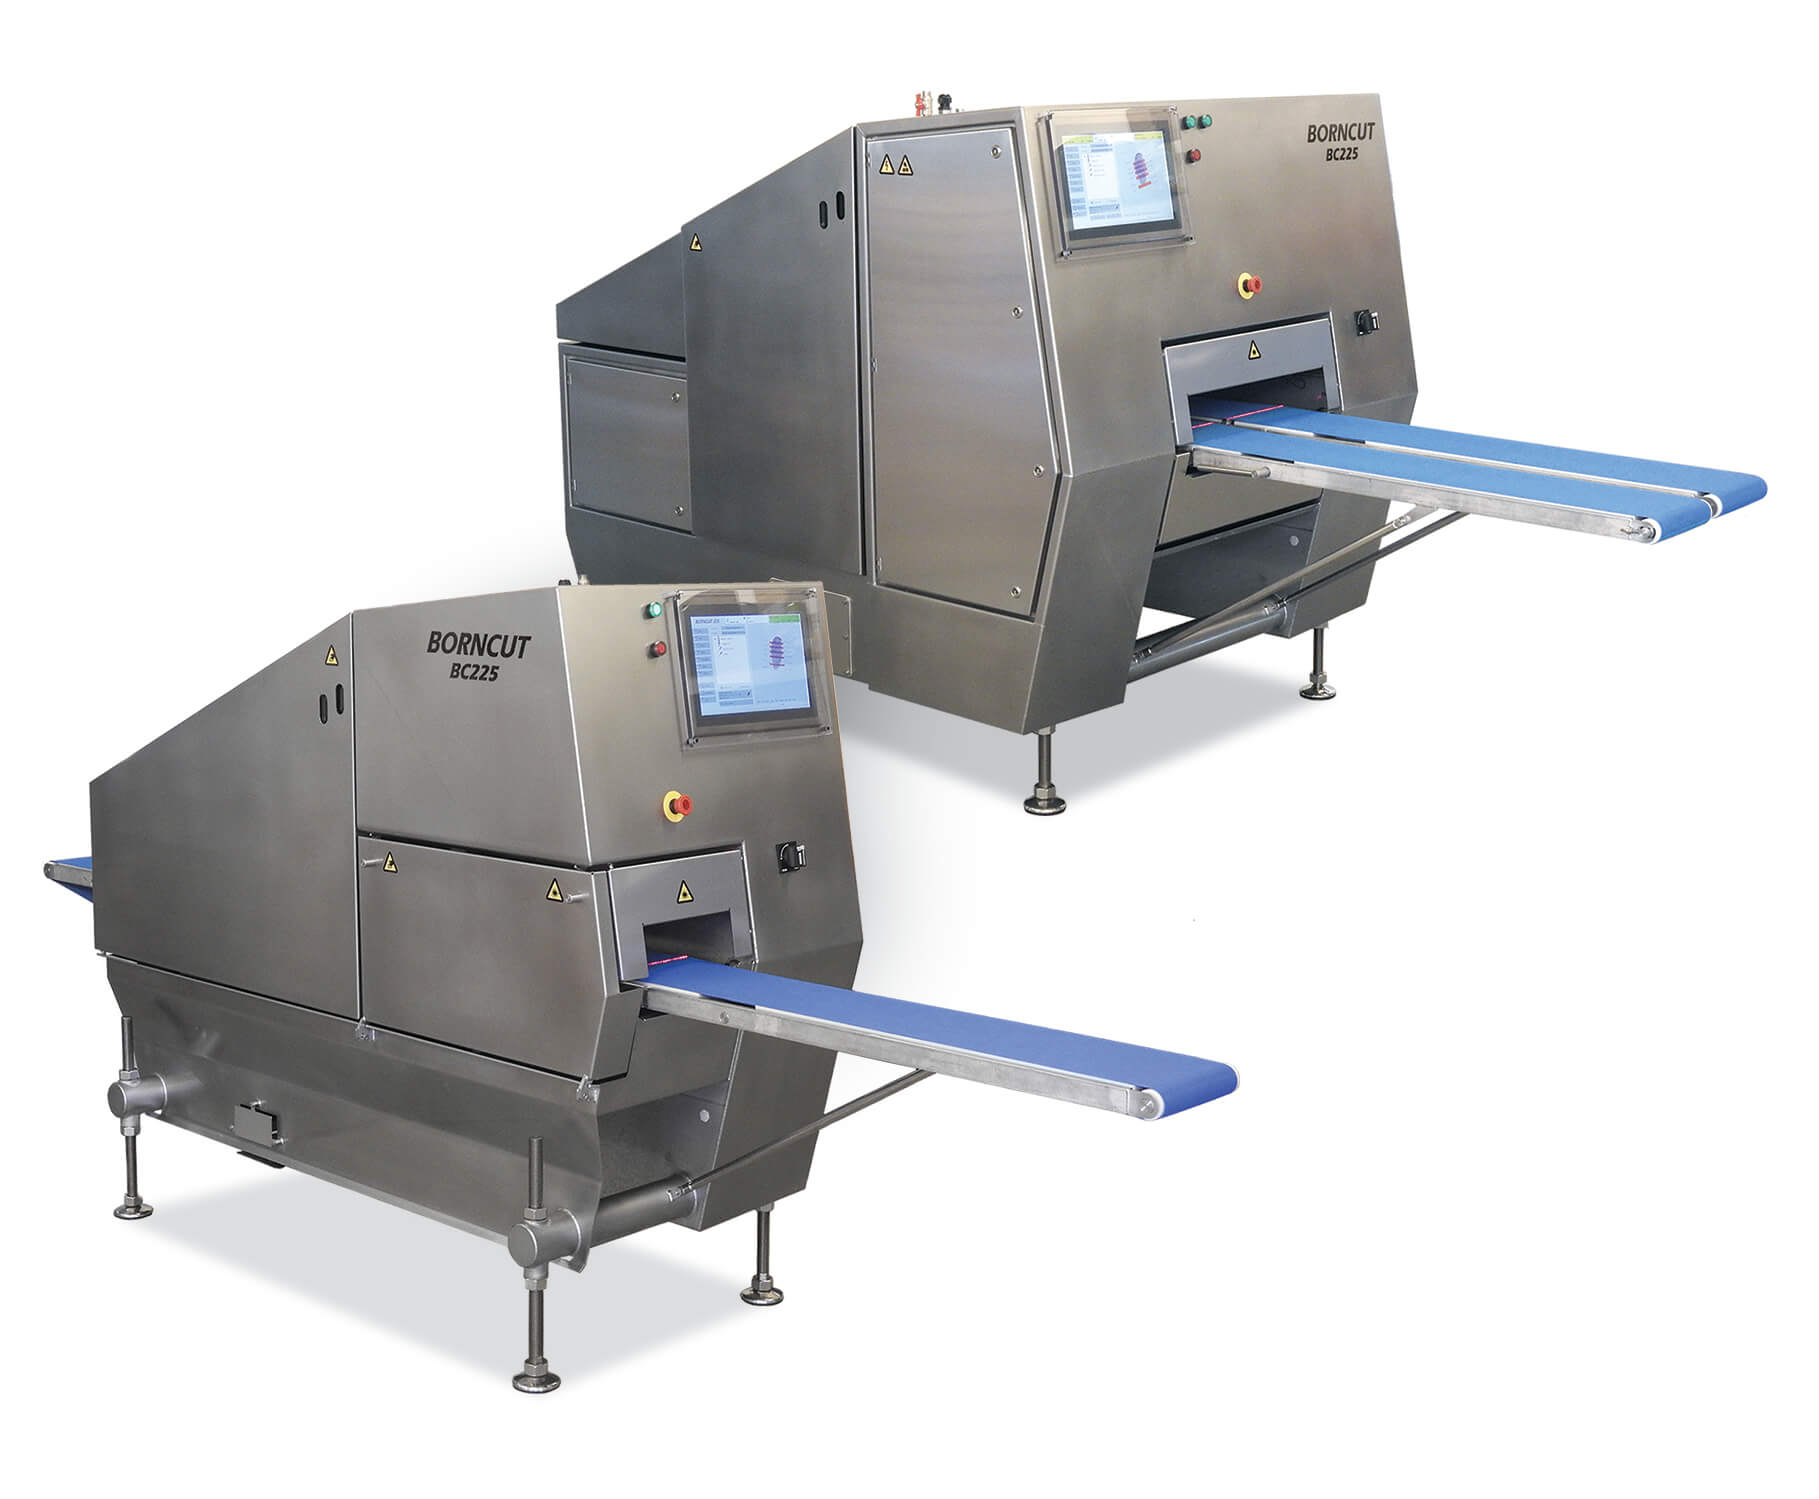 Effective January 1, 2020, single- and dual-lane precision portion cutters manufactured by the Danish-based company Borncut are being sold and serviced in North America by Bettcher Industries, Inc.